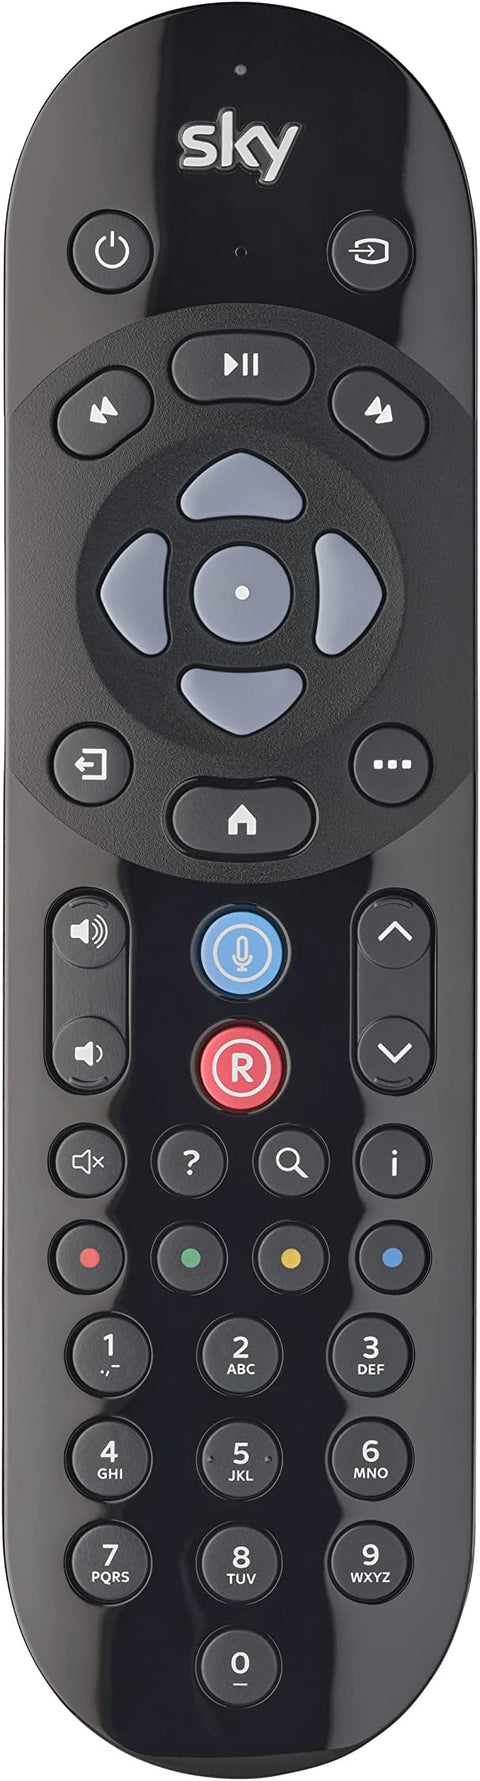 Original SKY Q Voice Remote Control - Compatible with Sky Q 1TB or 2TB, Sky Q Mini box | Damaged Packaging